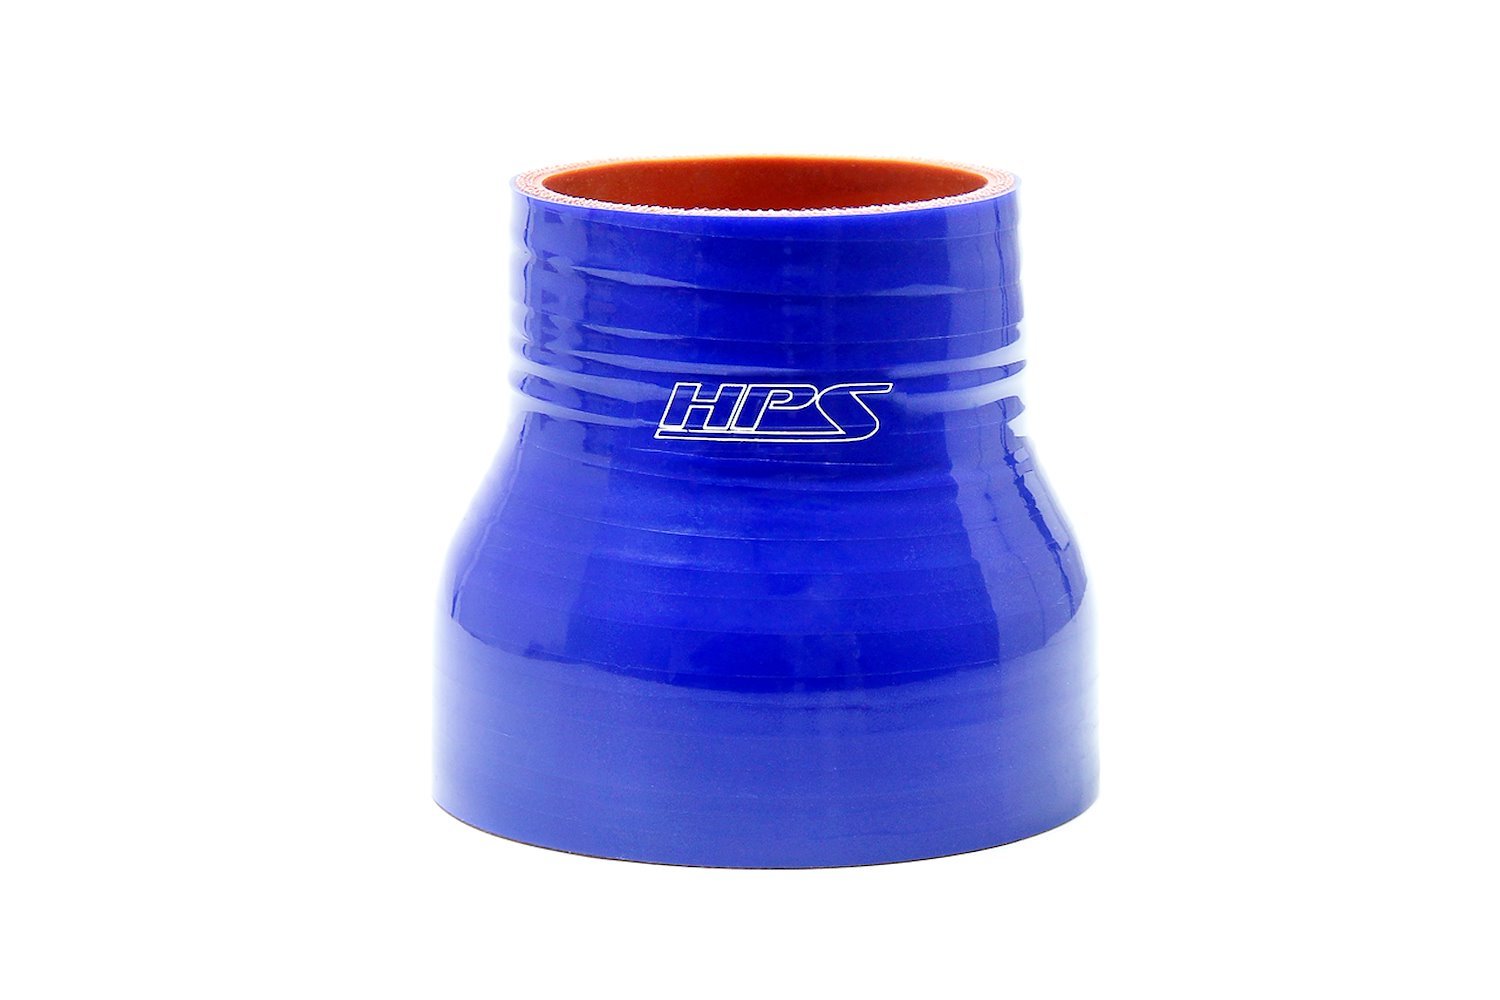 HTSR-300-325-L6-BLUE Silicone Reducer Hose, High-Temp 4-Ply Reinforced, 3 in. - 3-1/4 in. ID, 6 in. Long, Blue